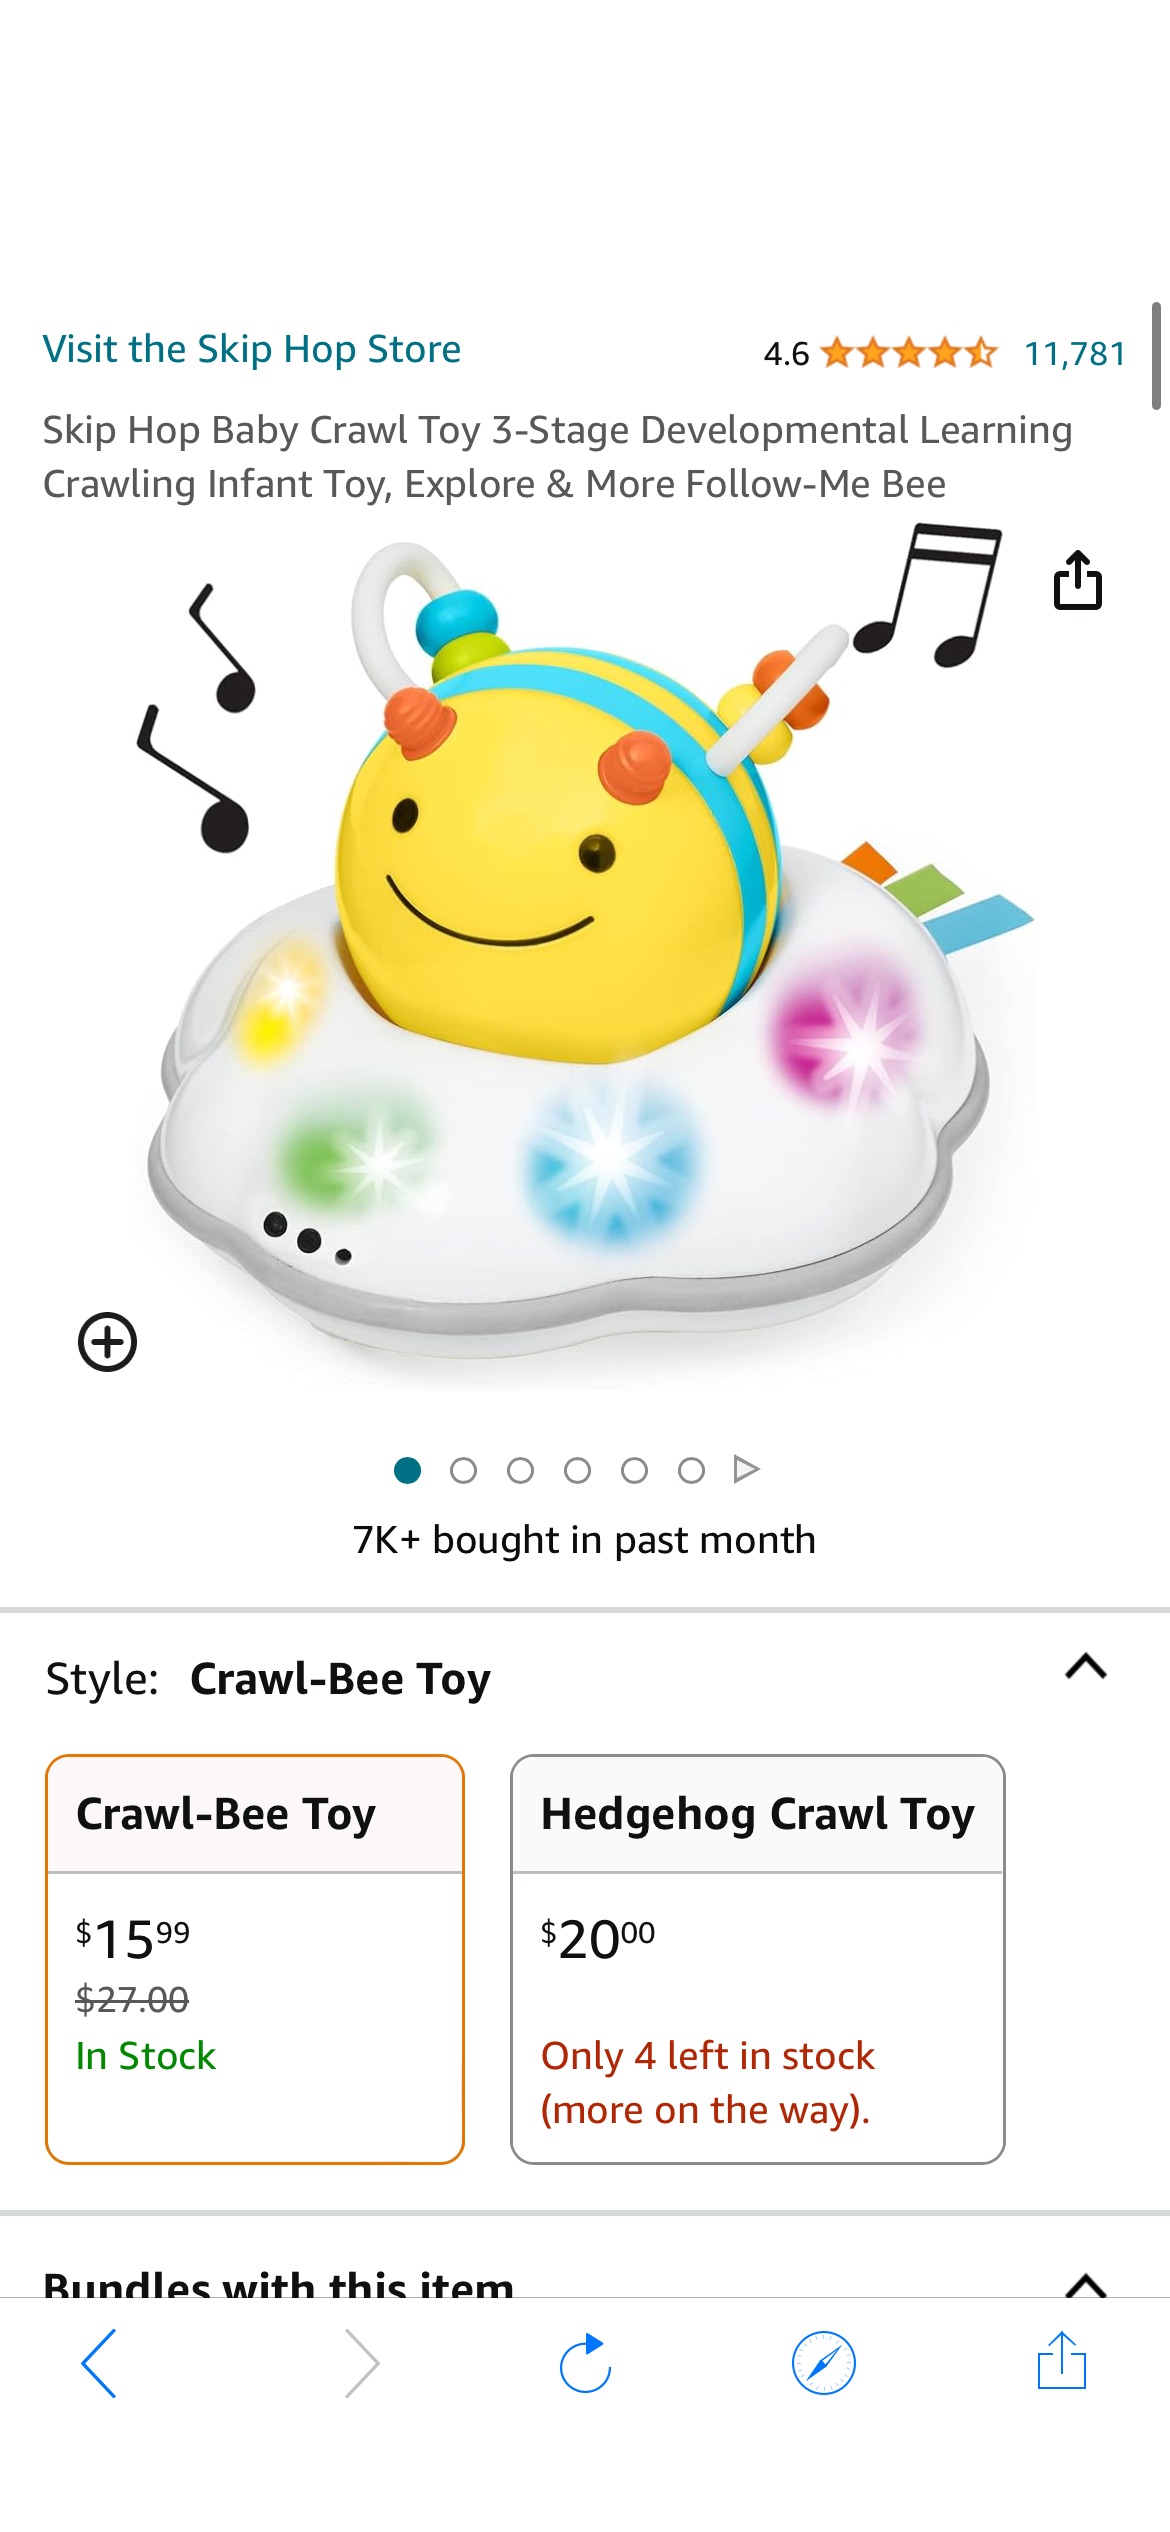 Amazon.com : Skip Hop Baby Crawl Toy 3-Stage Developmental Learning Crawling Infant Toy, Explore & More Follow-Me Bee : Toys & Games宝宝玩具